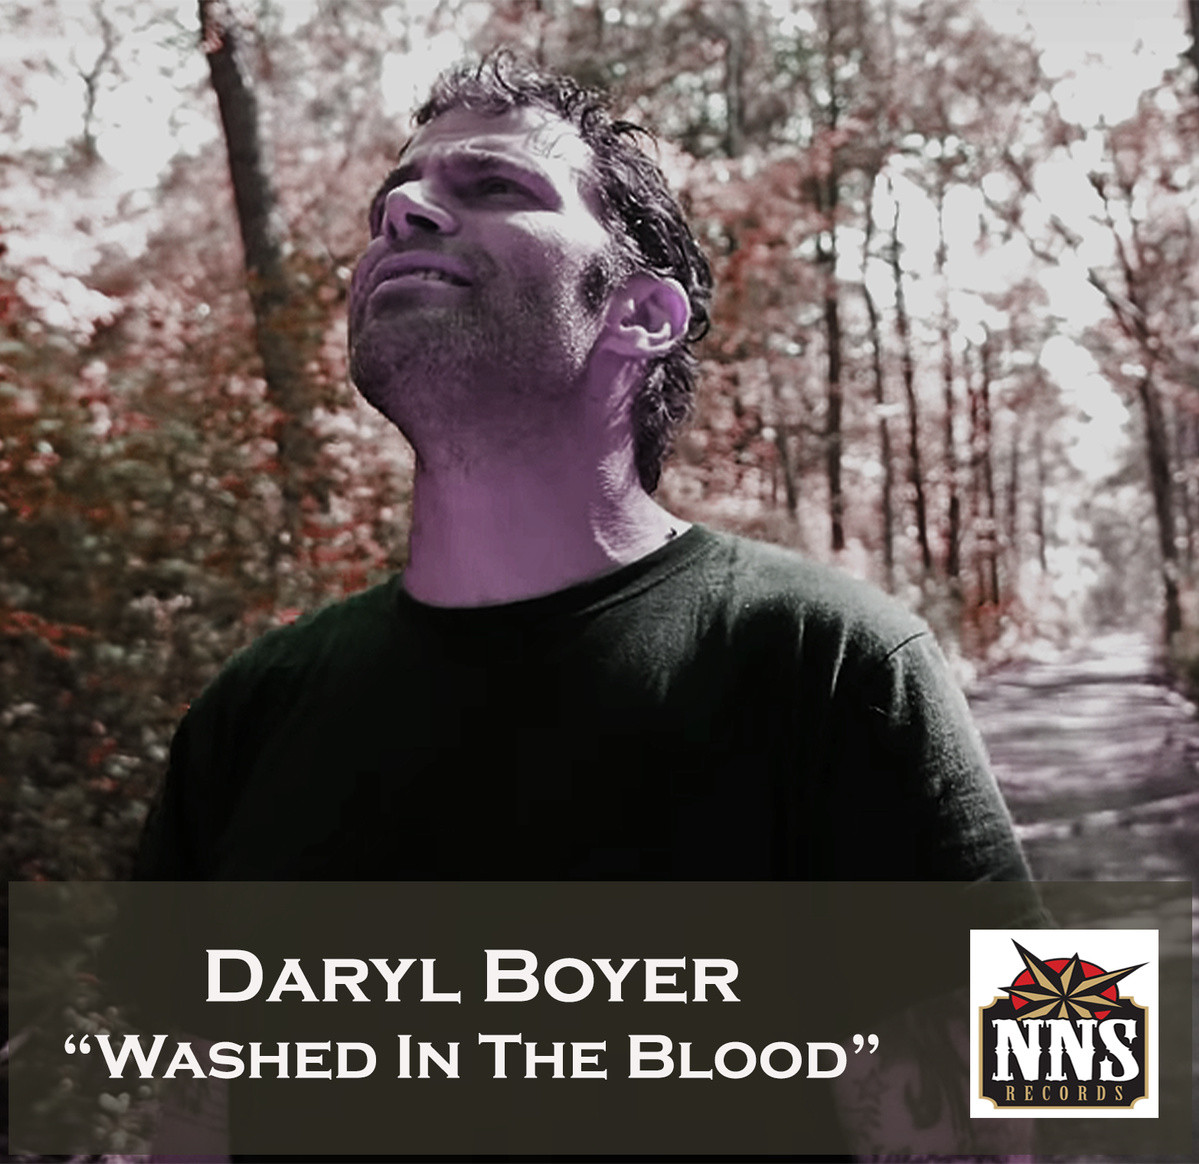 Daryl Boyer Returns With New Single 'Washed In The Blood' Ahead of 'Who I Am' EP